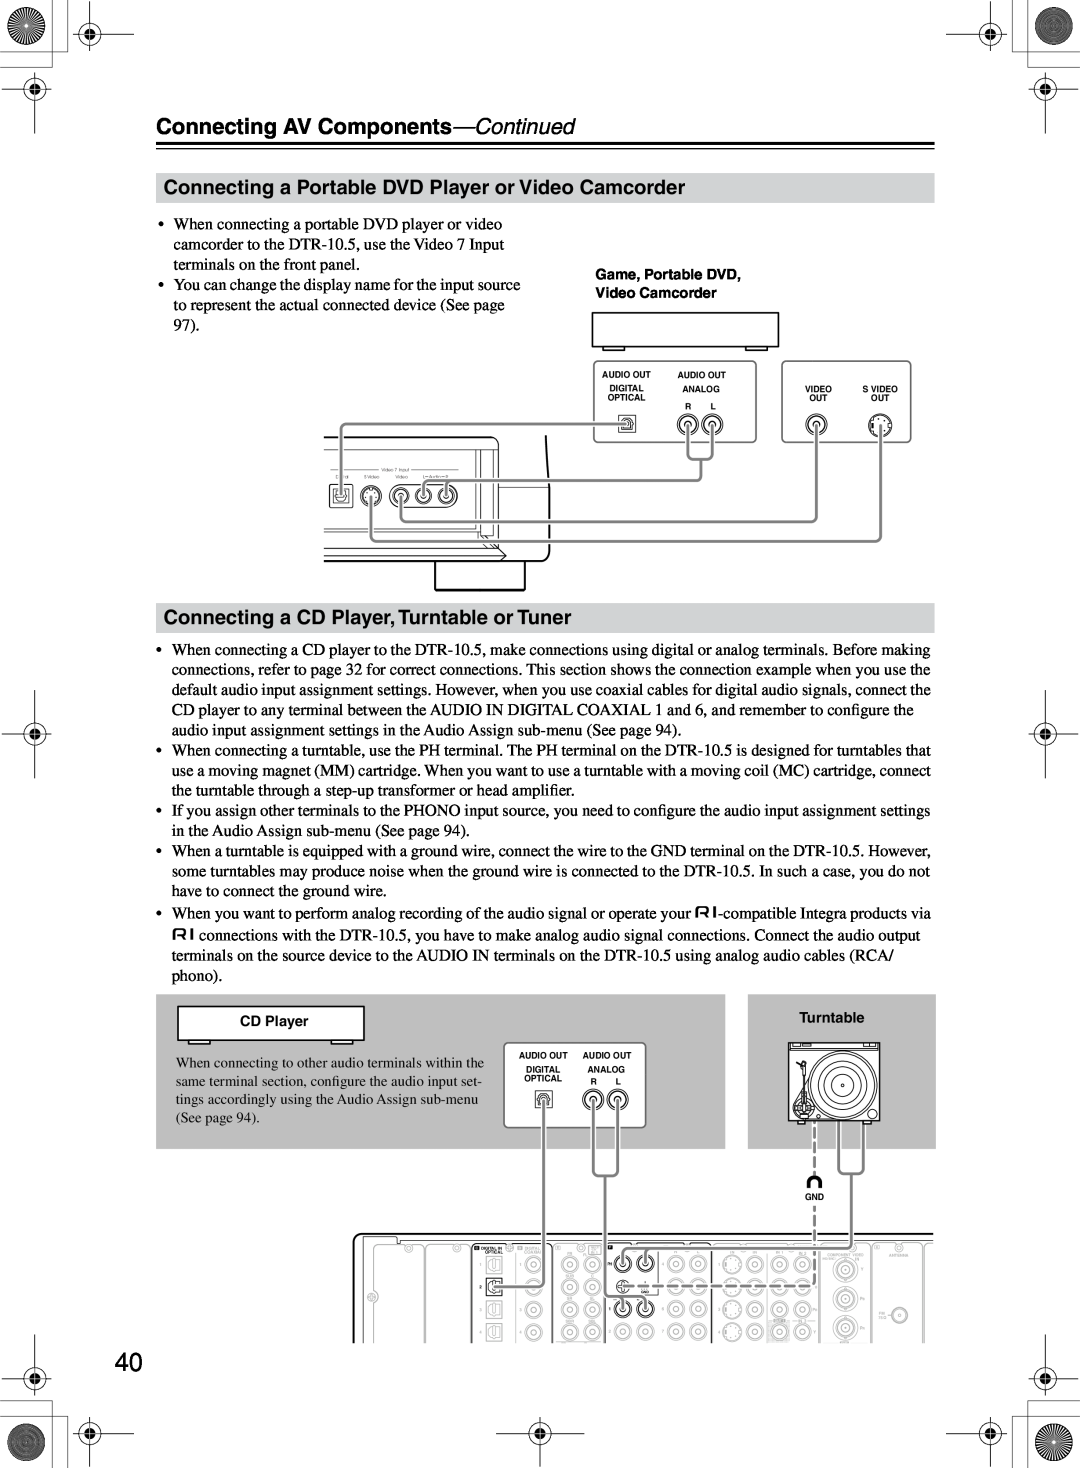 Integra DTR-10.5 instruction manual Connecting a CD Player, Turntable or Tuner, Connecting AV Components—Continued 